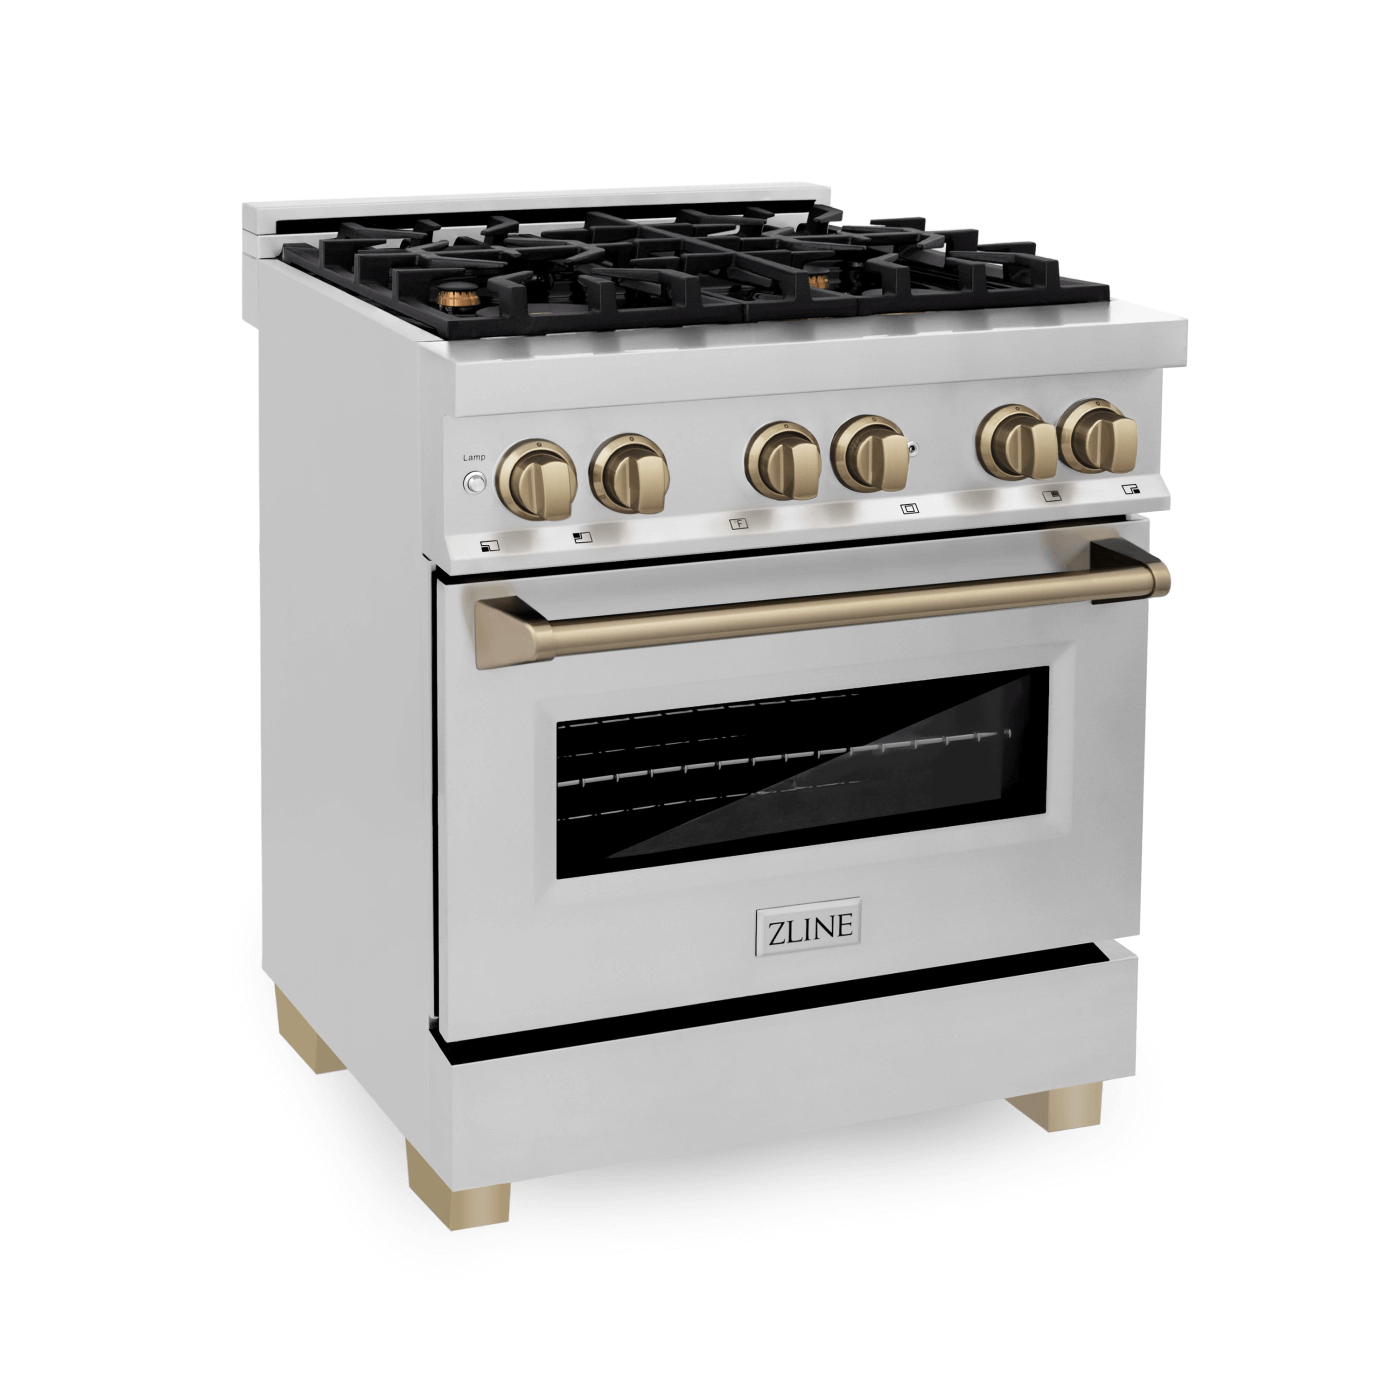 ZLINE Autograph Edition 30 in. 4.0 cu. ft. Dual Fuel Range with Gas Stove and Electric Oven in Stainless Steel with Champagne Bronze Accents (RAZ-30-CB) - white background